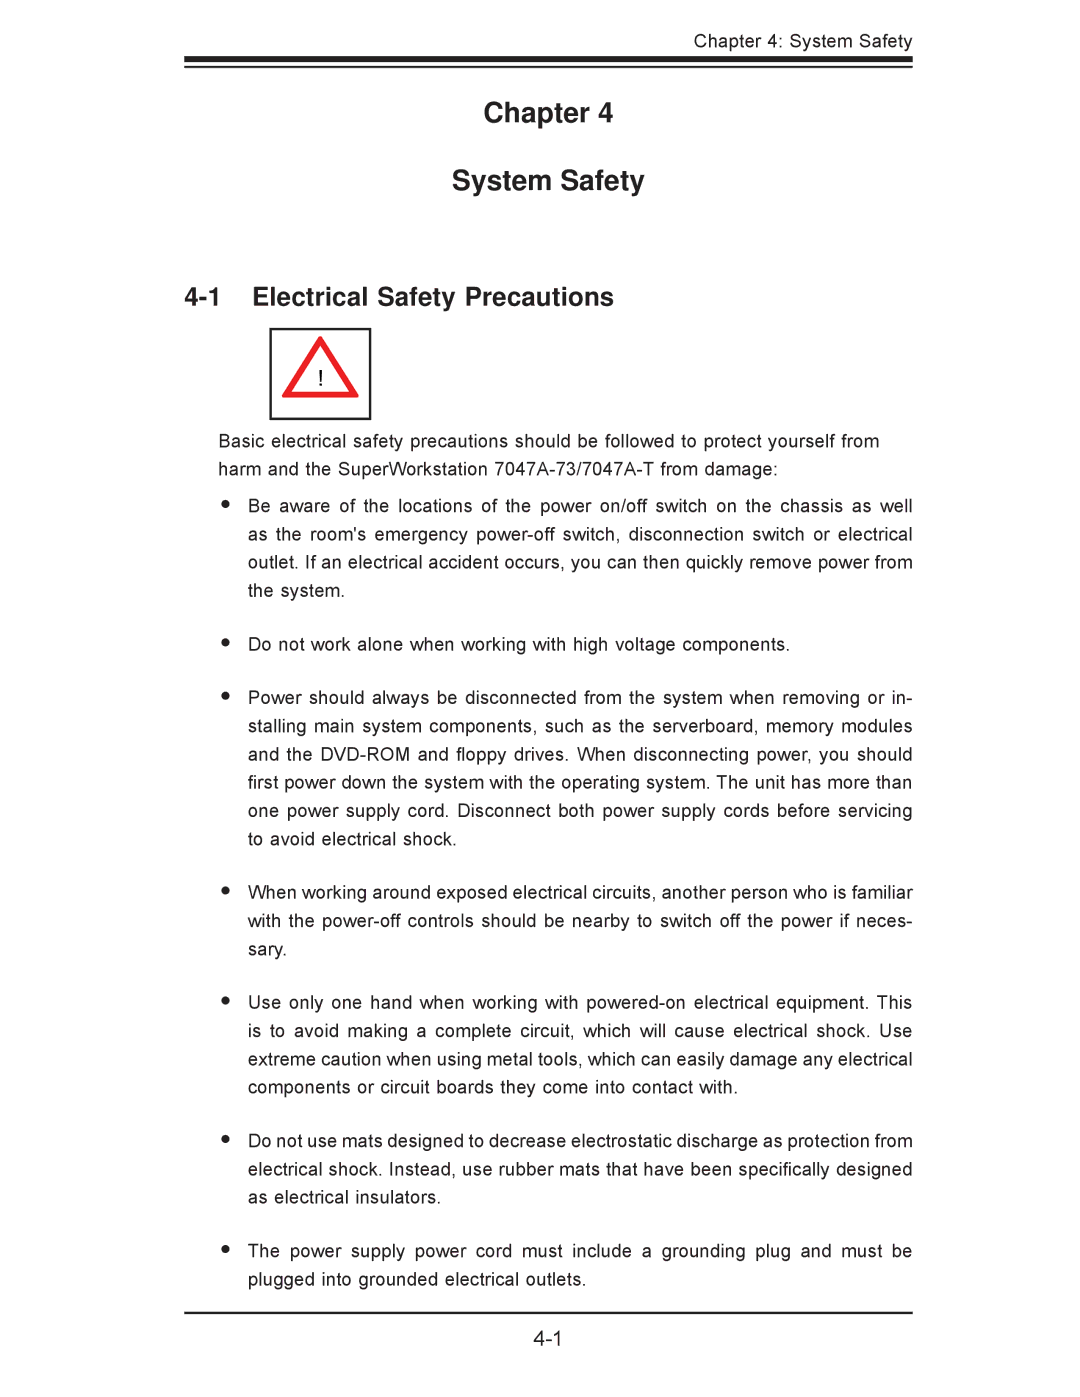 SUPER MICRO Computer 7047A-73, 7047A-T user manual Chapter System Safety, Electrical Safety Precautions 